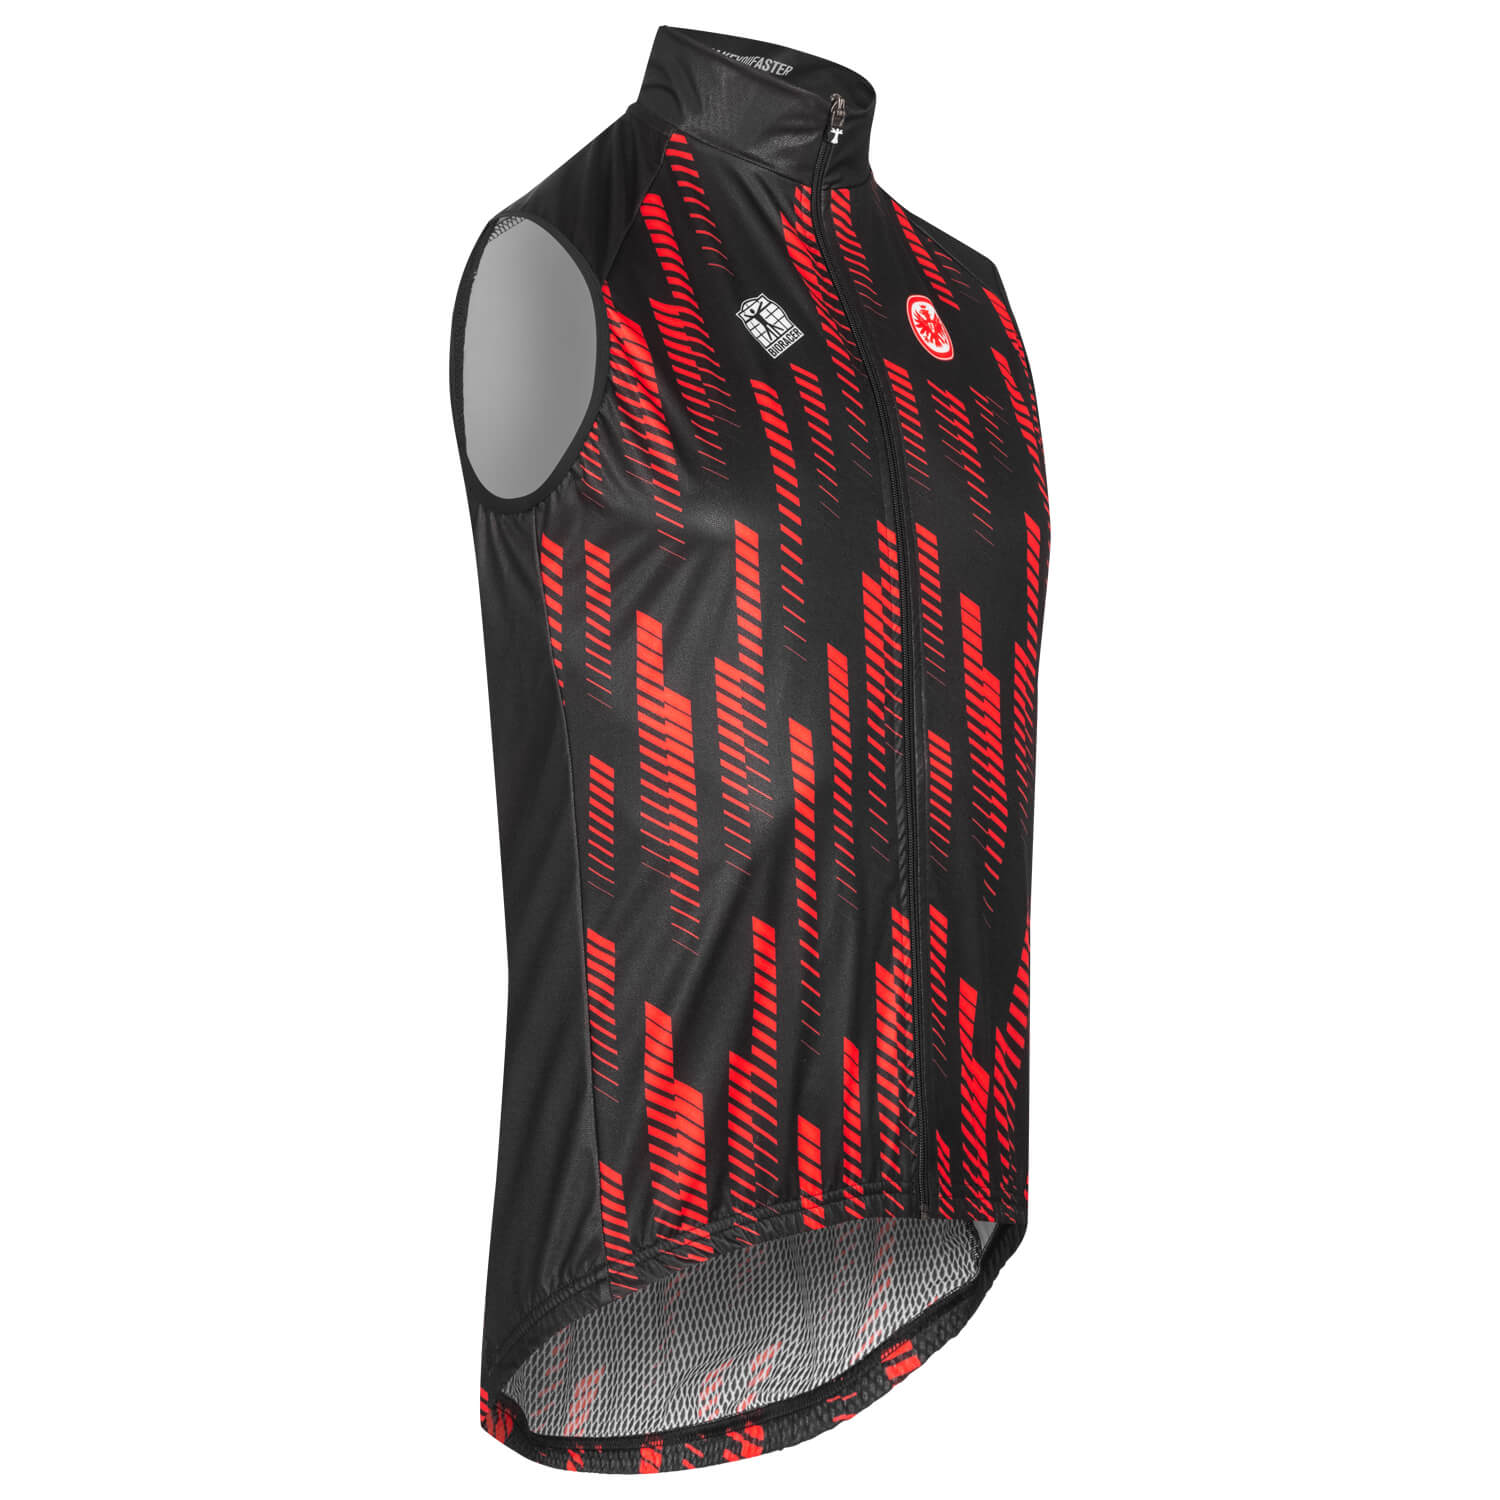 Bild 4: Cycling Vest Red Style 